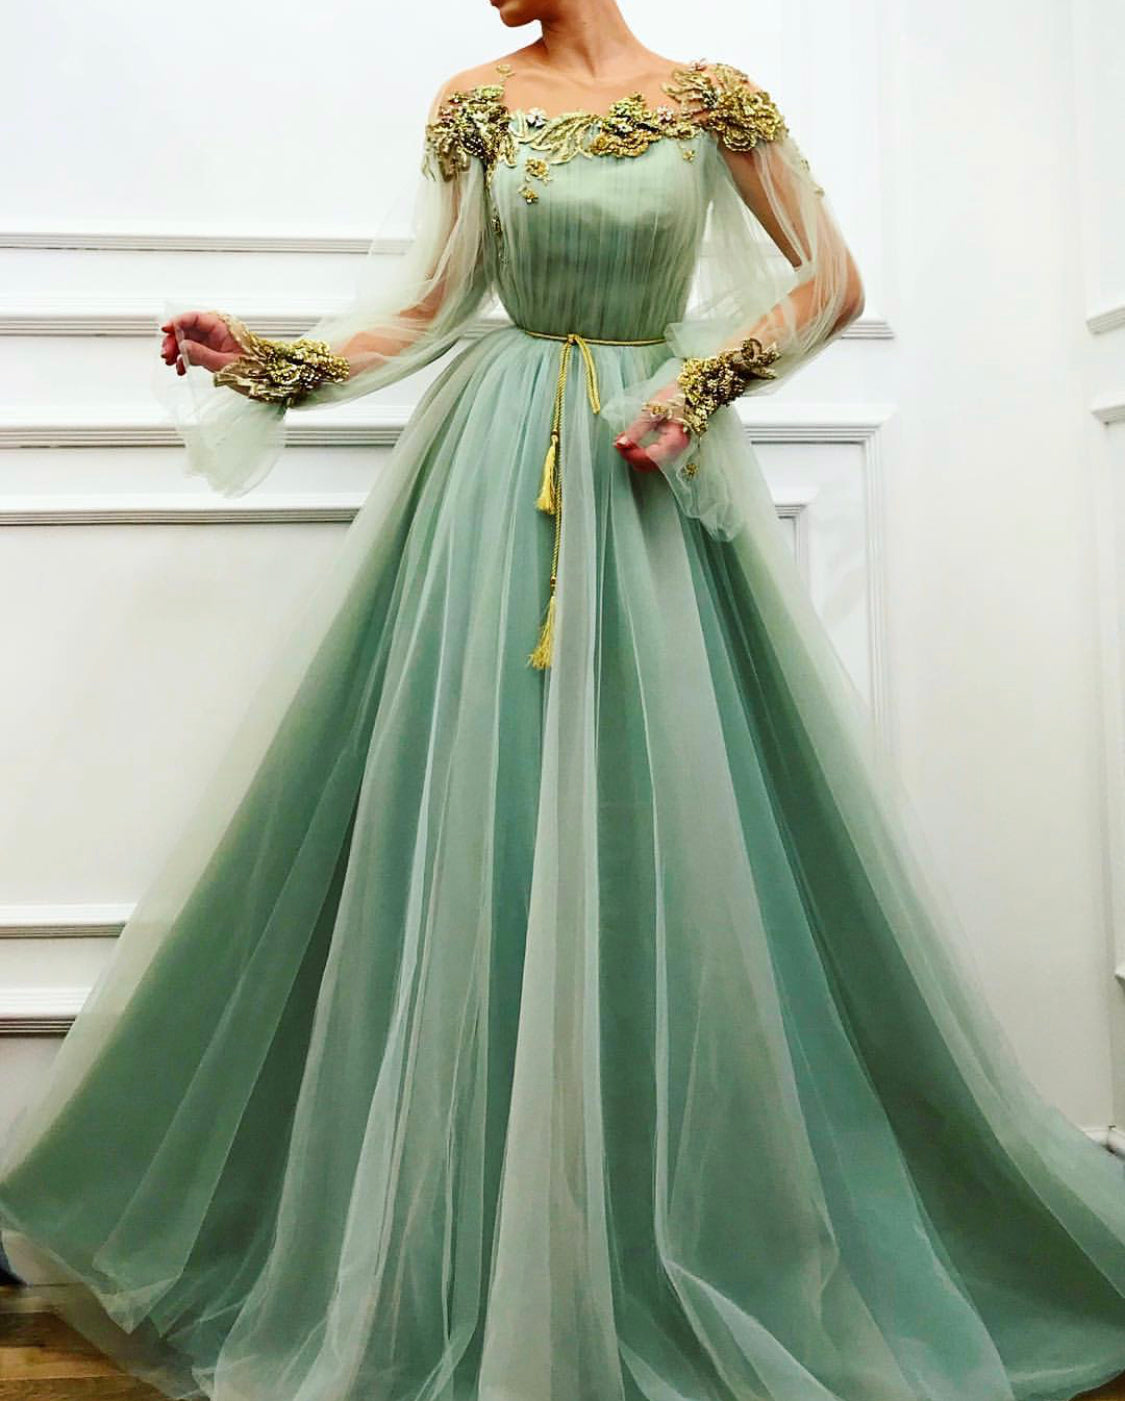 Green A-Line dress with long sleeves and embroidery